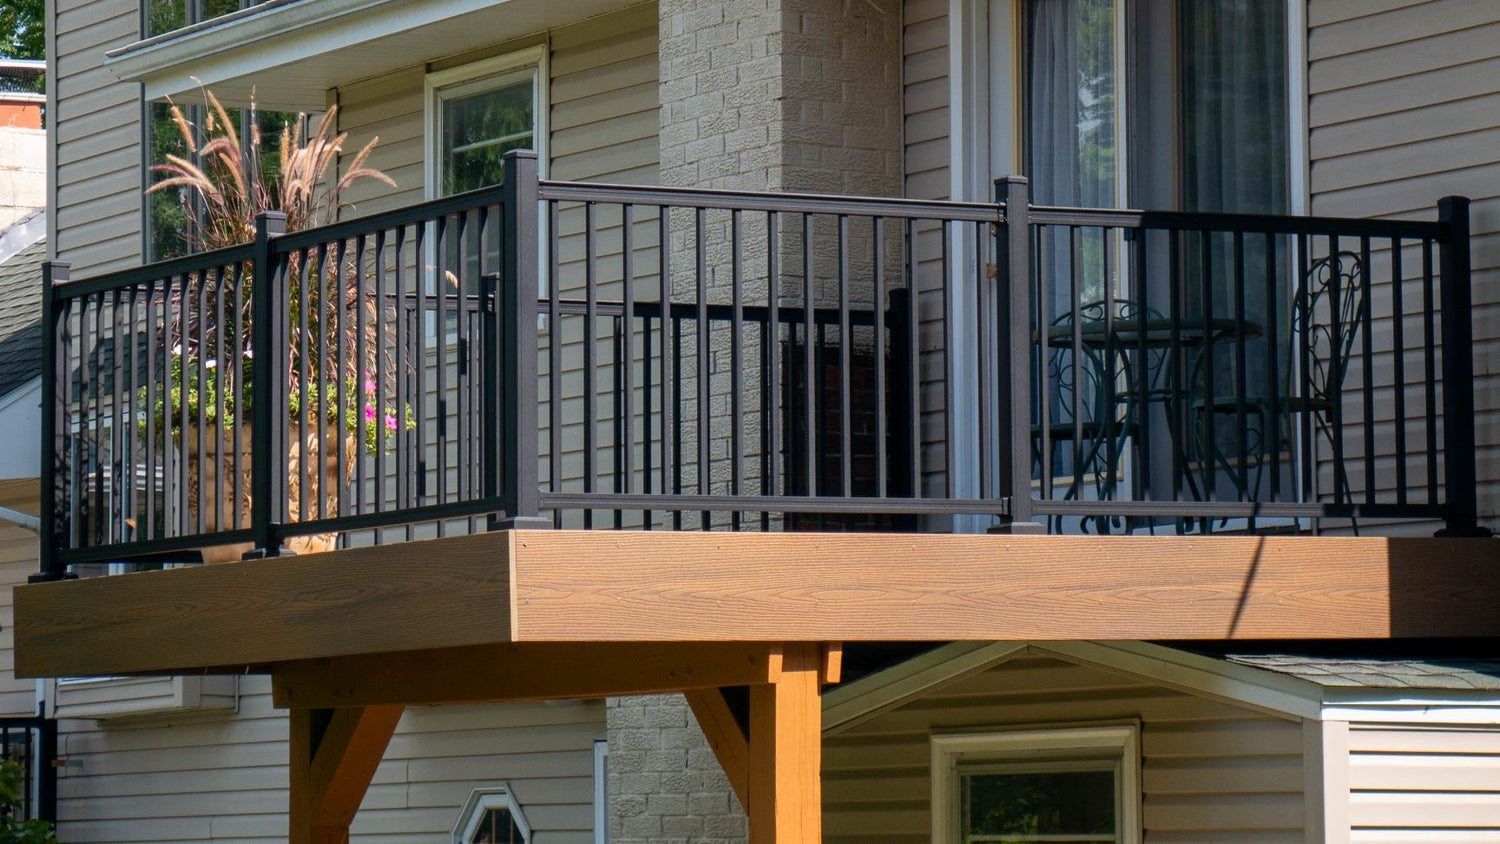 Aluminum deck railing on a walkout composite deck finishes the space nicely. Here we see advantage rail in textured black